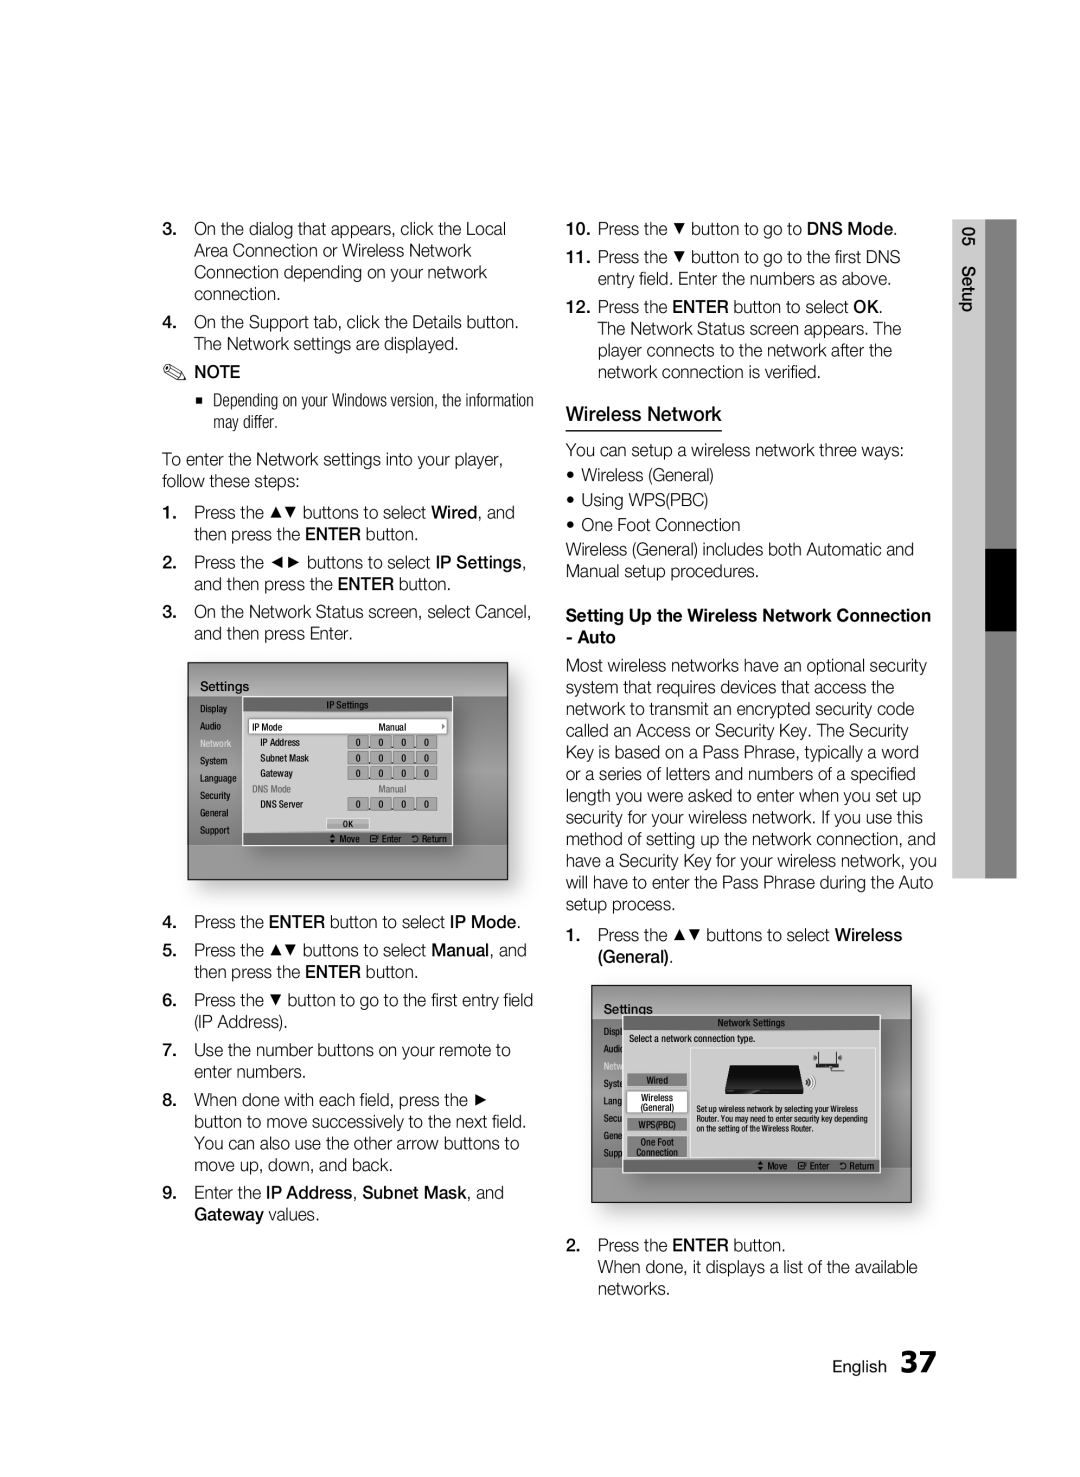 Samsung BD-D6500 user manual Setting Up the Wireless Network Connection - Auto 